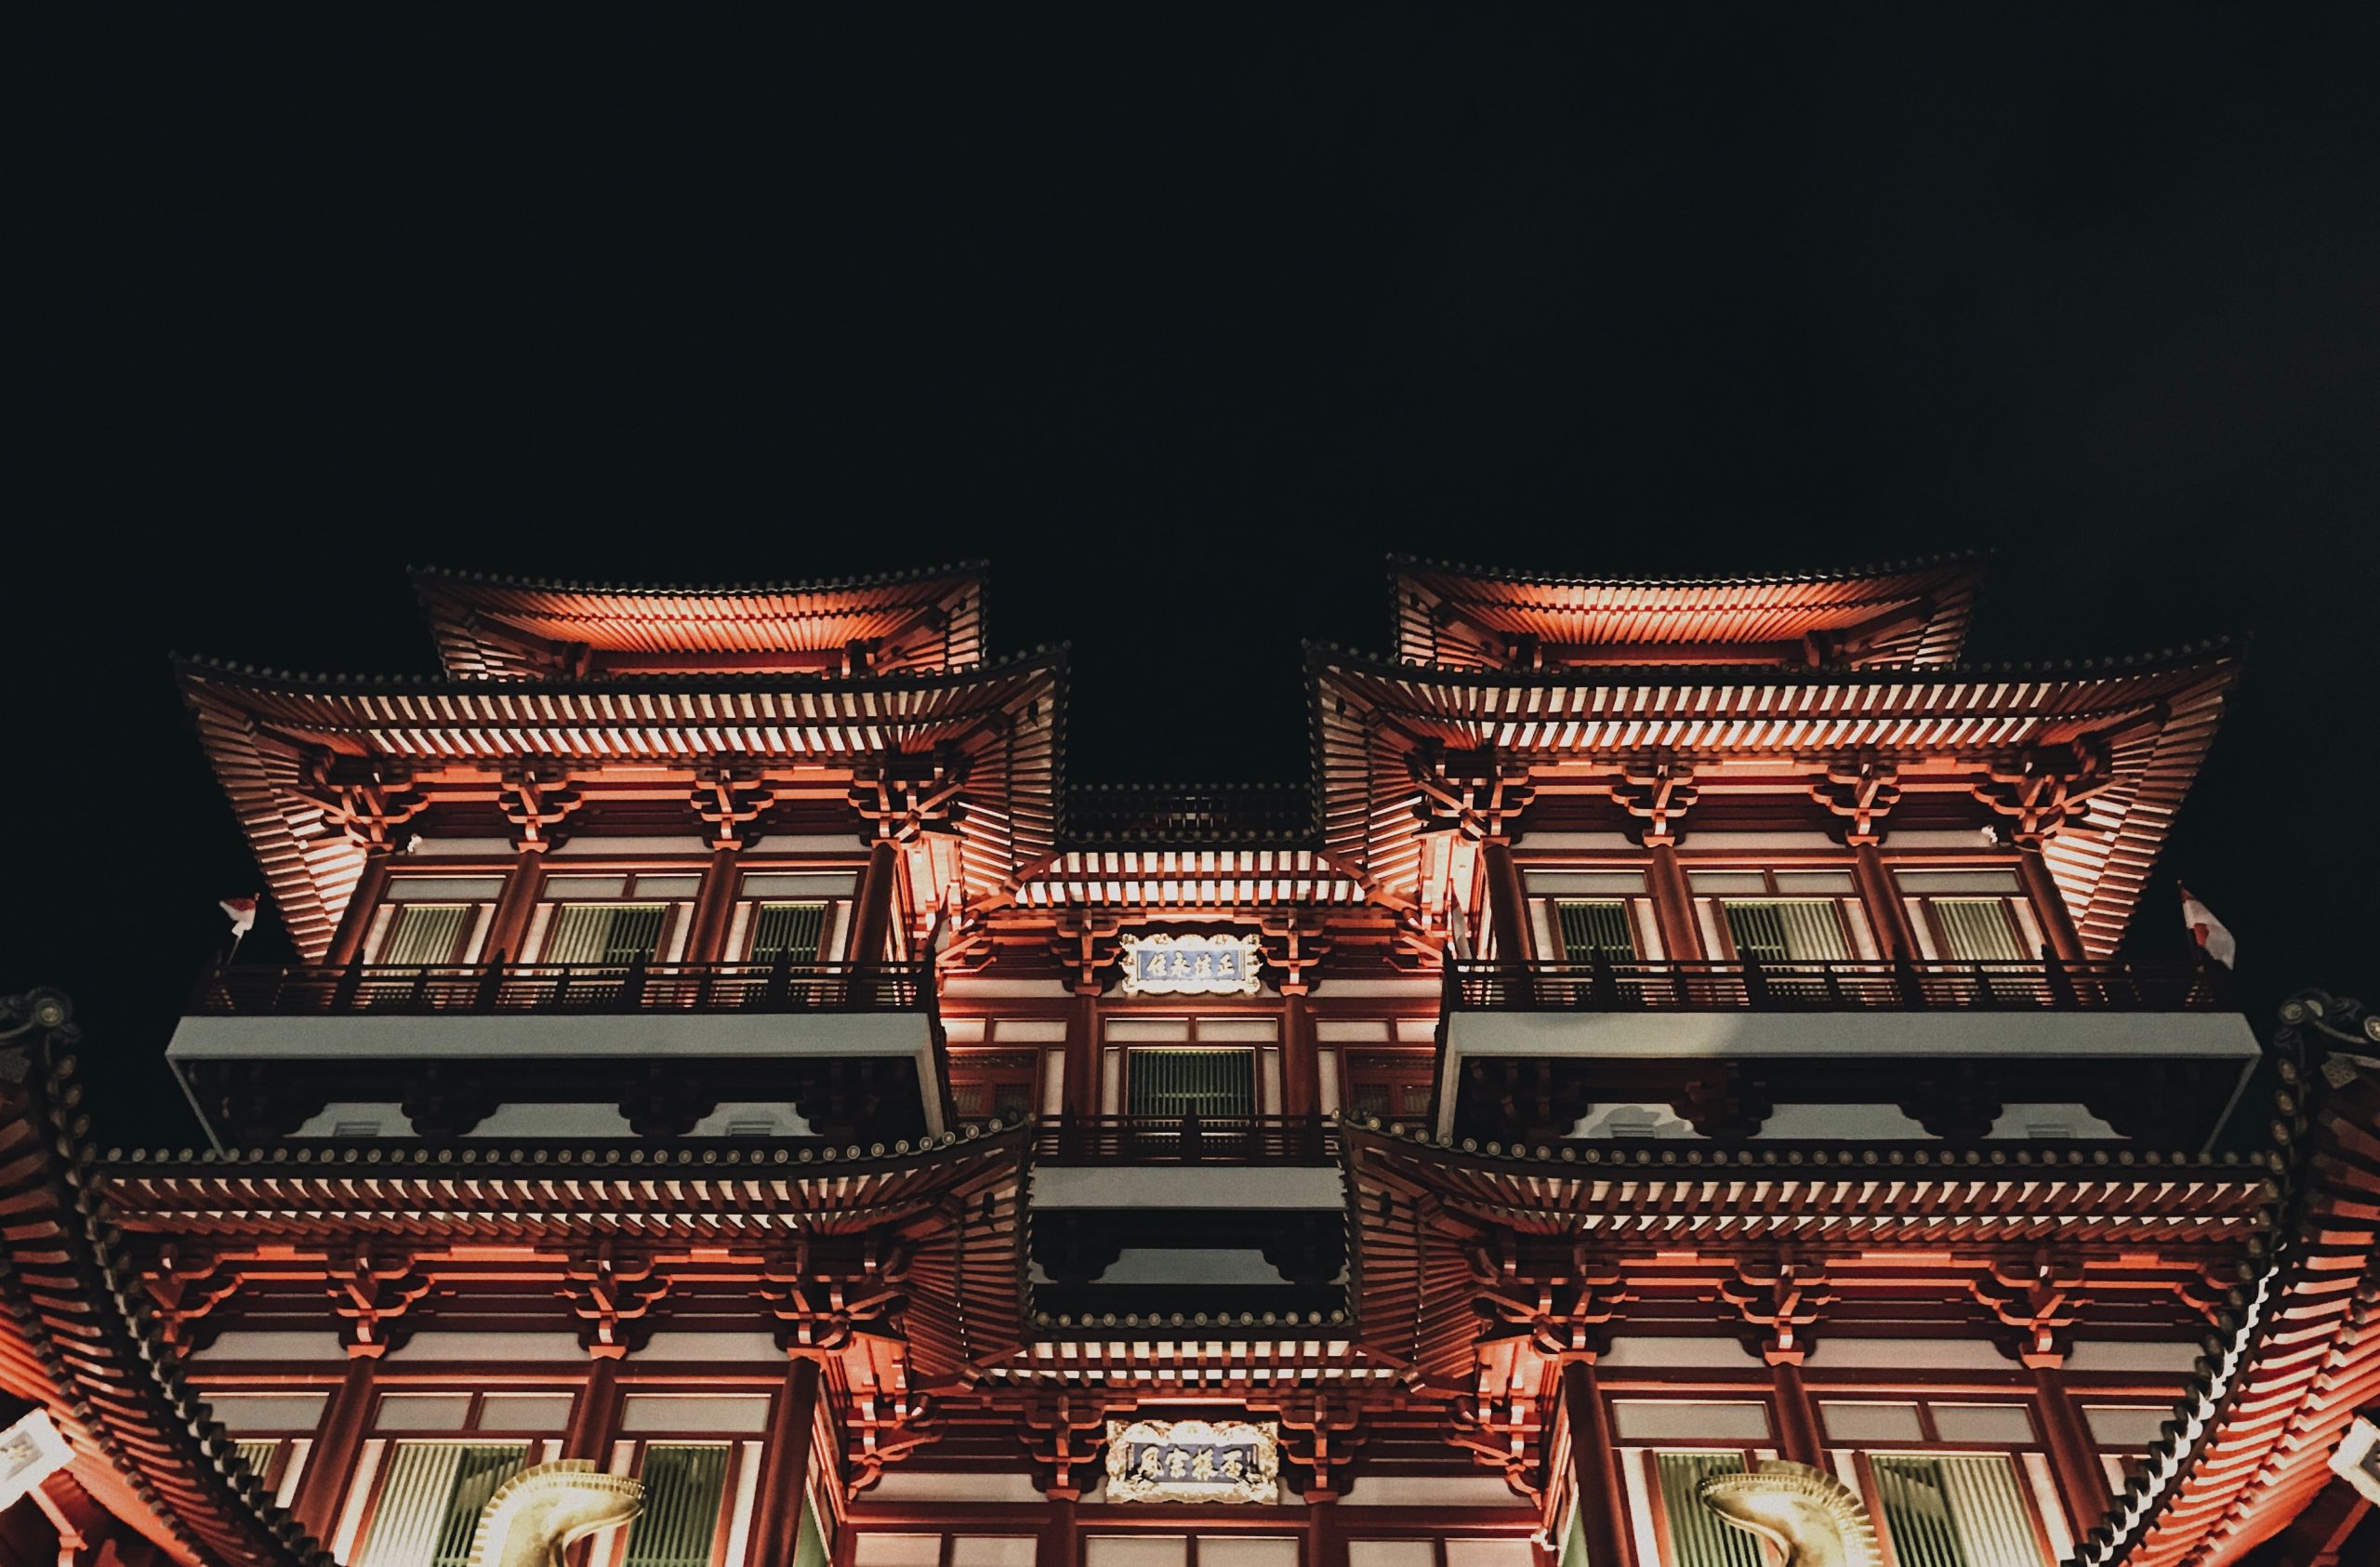 Chinatown to Little India: Exploring Singapore’s Diverse Cultural Districts